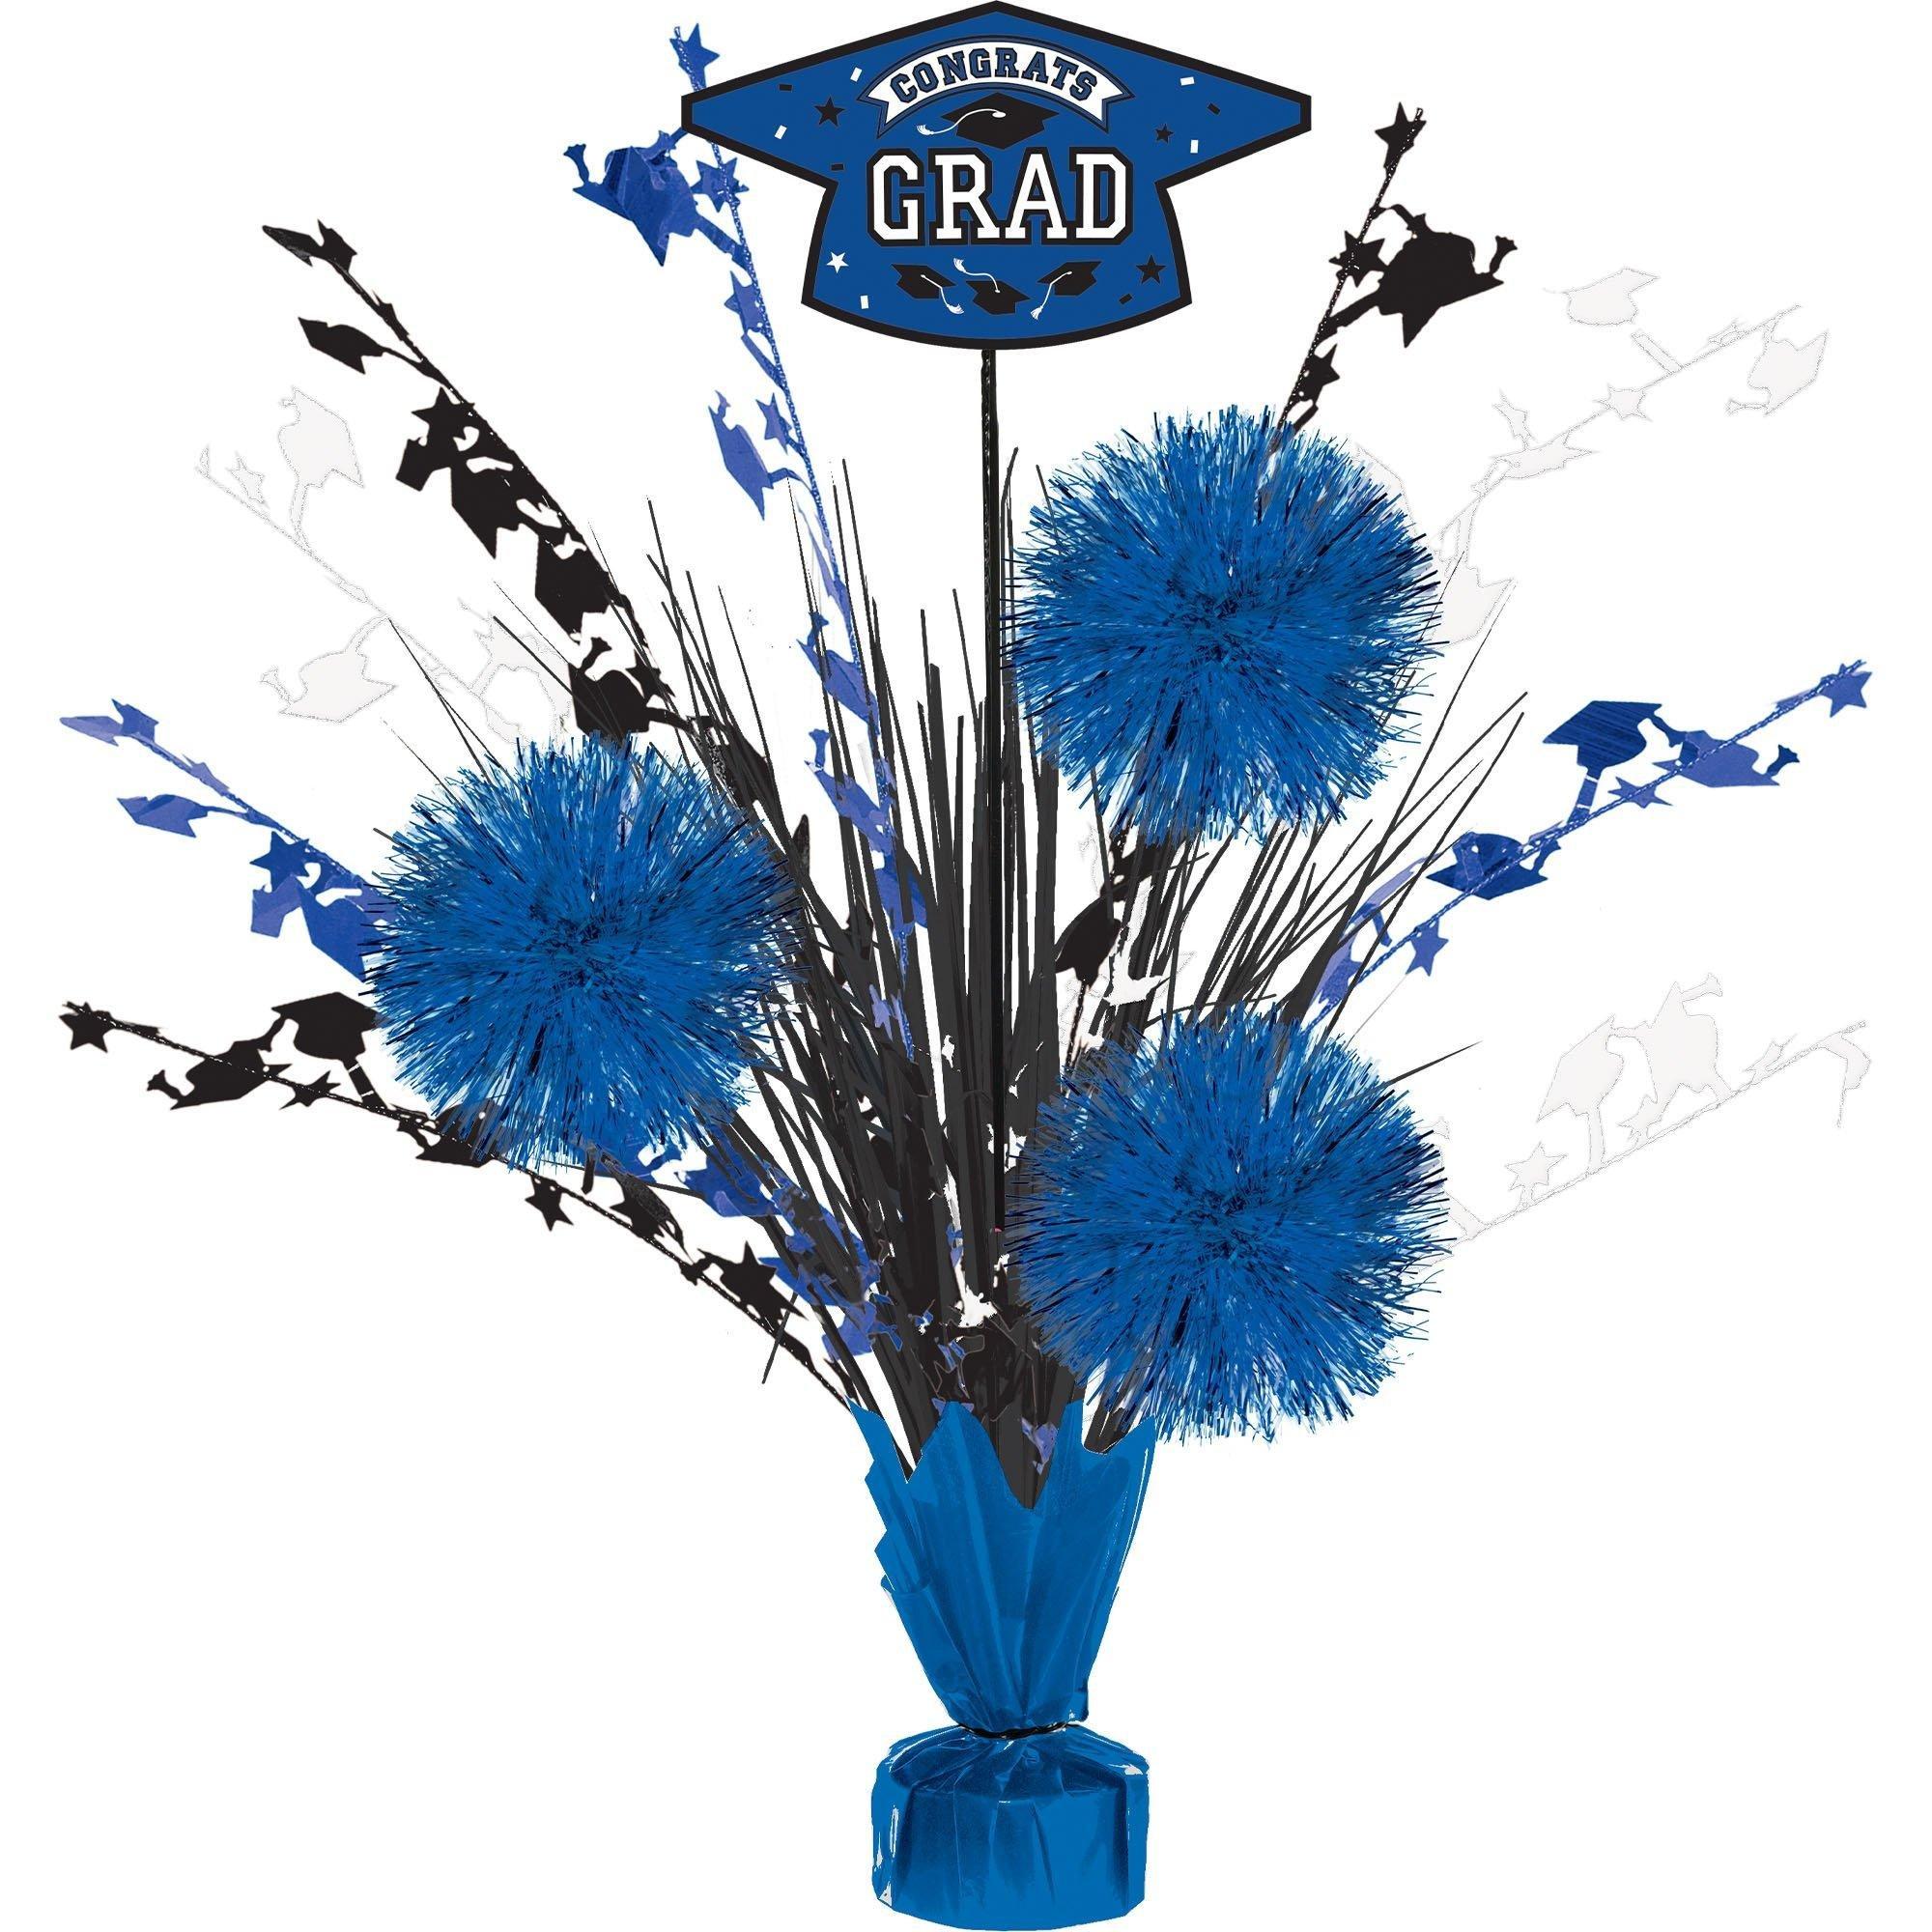 Graduation Party Supplies Kit for 60 with Decorations, Banners, Plates, Napkins, Cups - Blue Congrats Grad